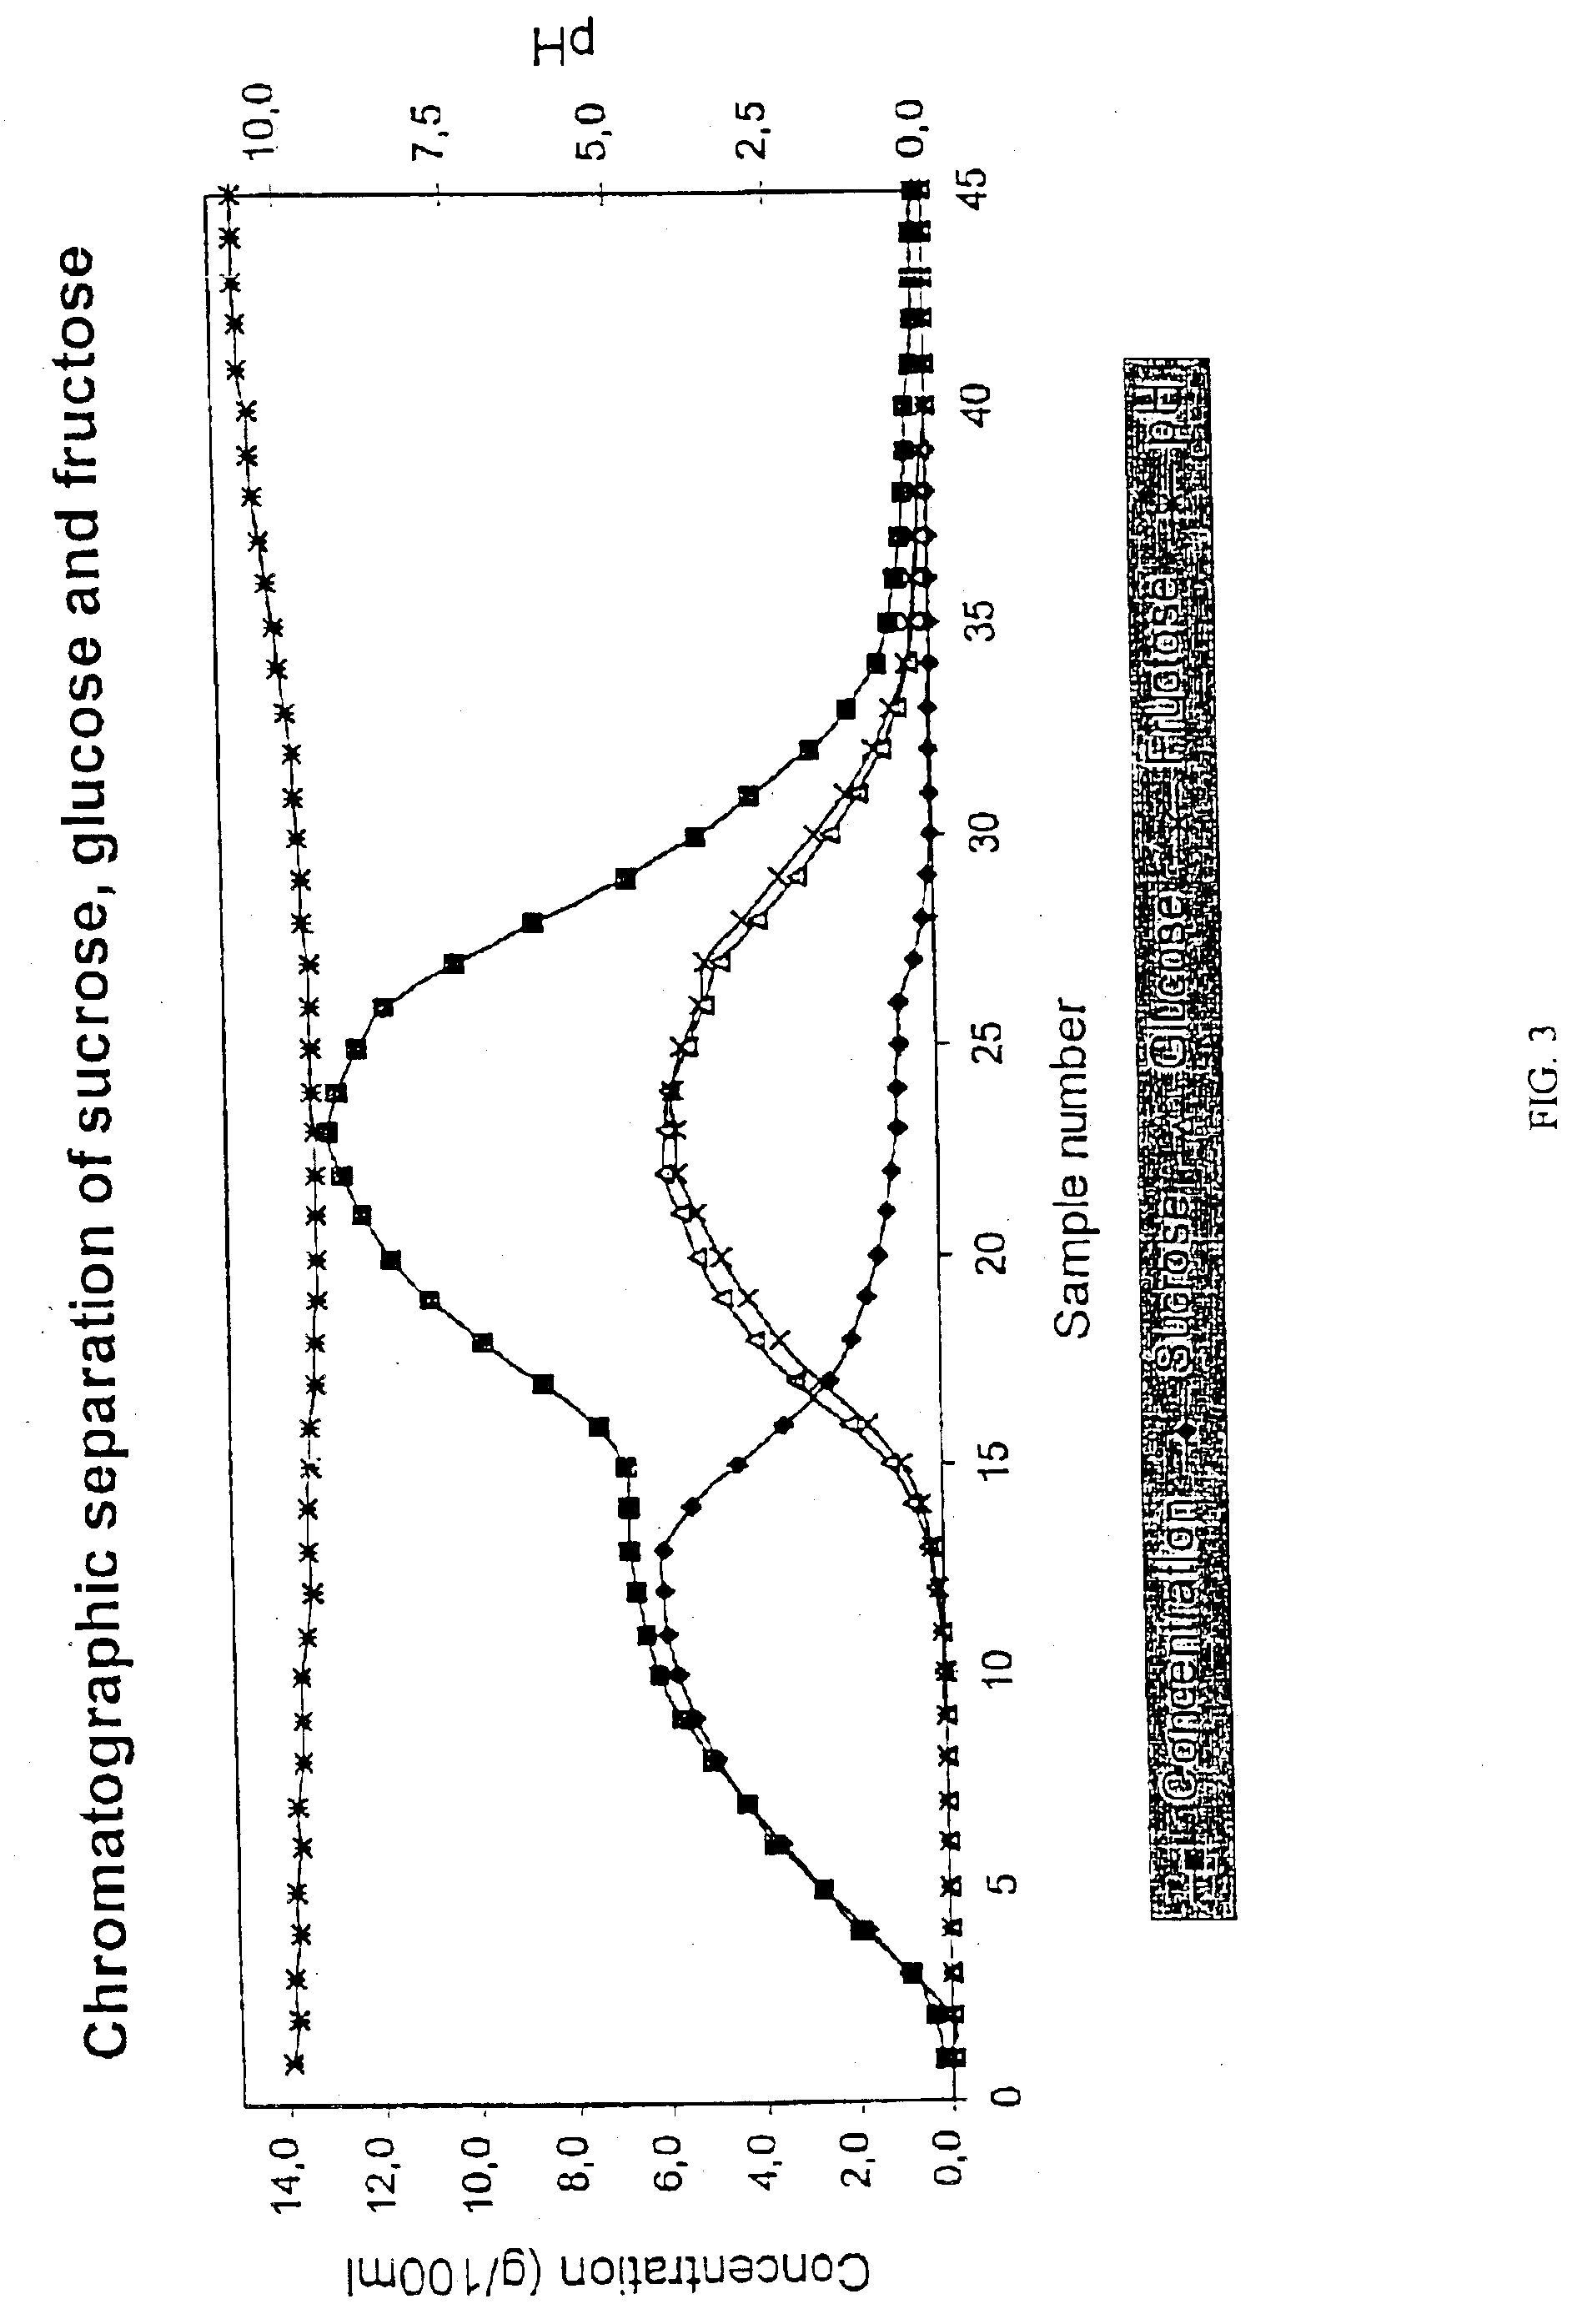 Use of a weakly acid cation exchange resin for chromatographic separation of carbohydrates